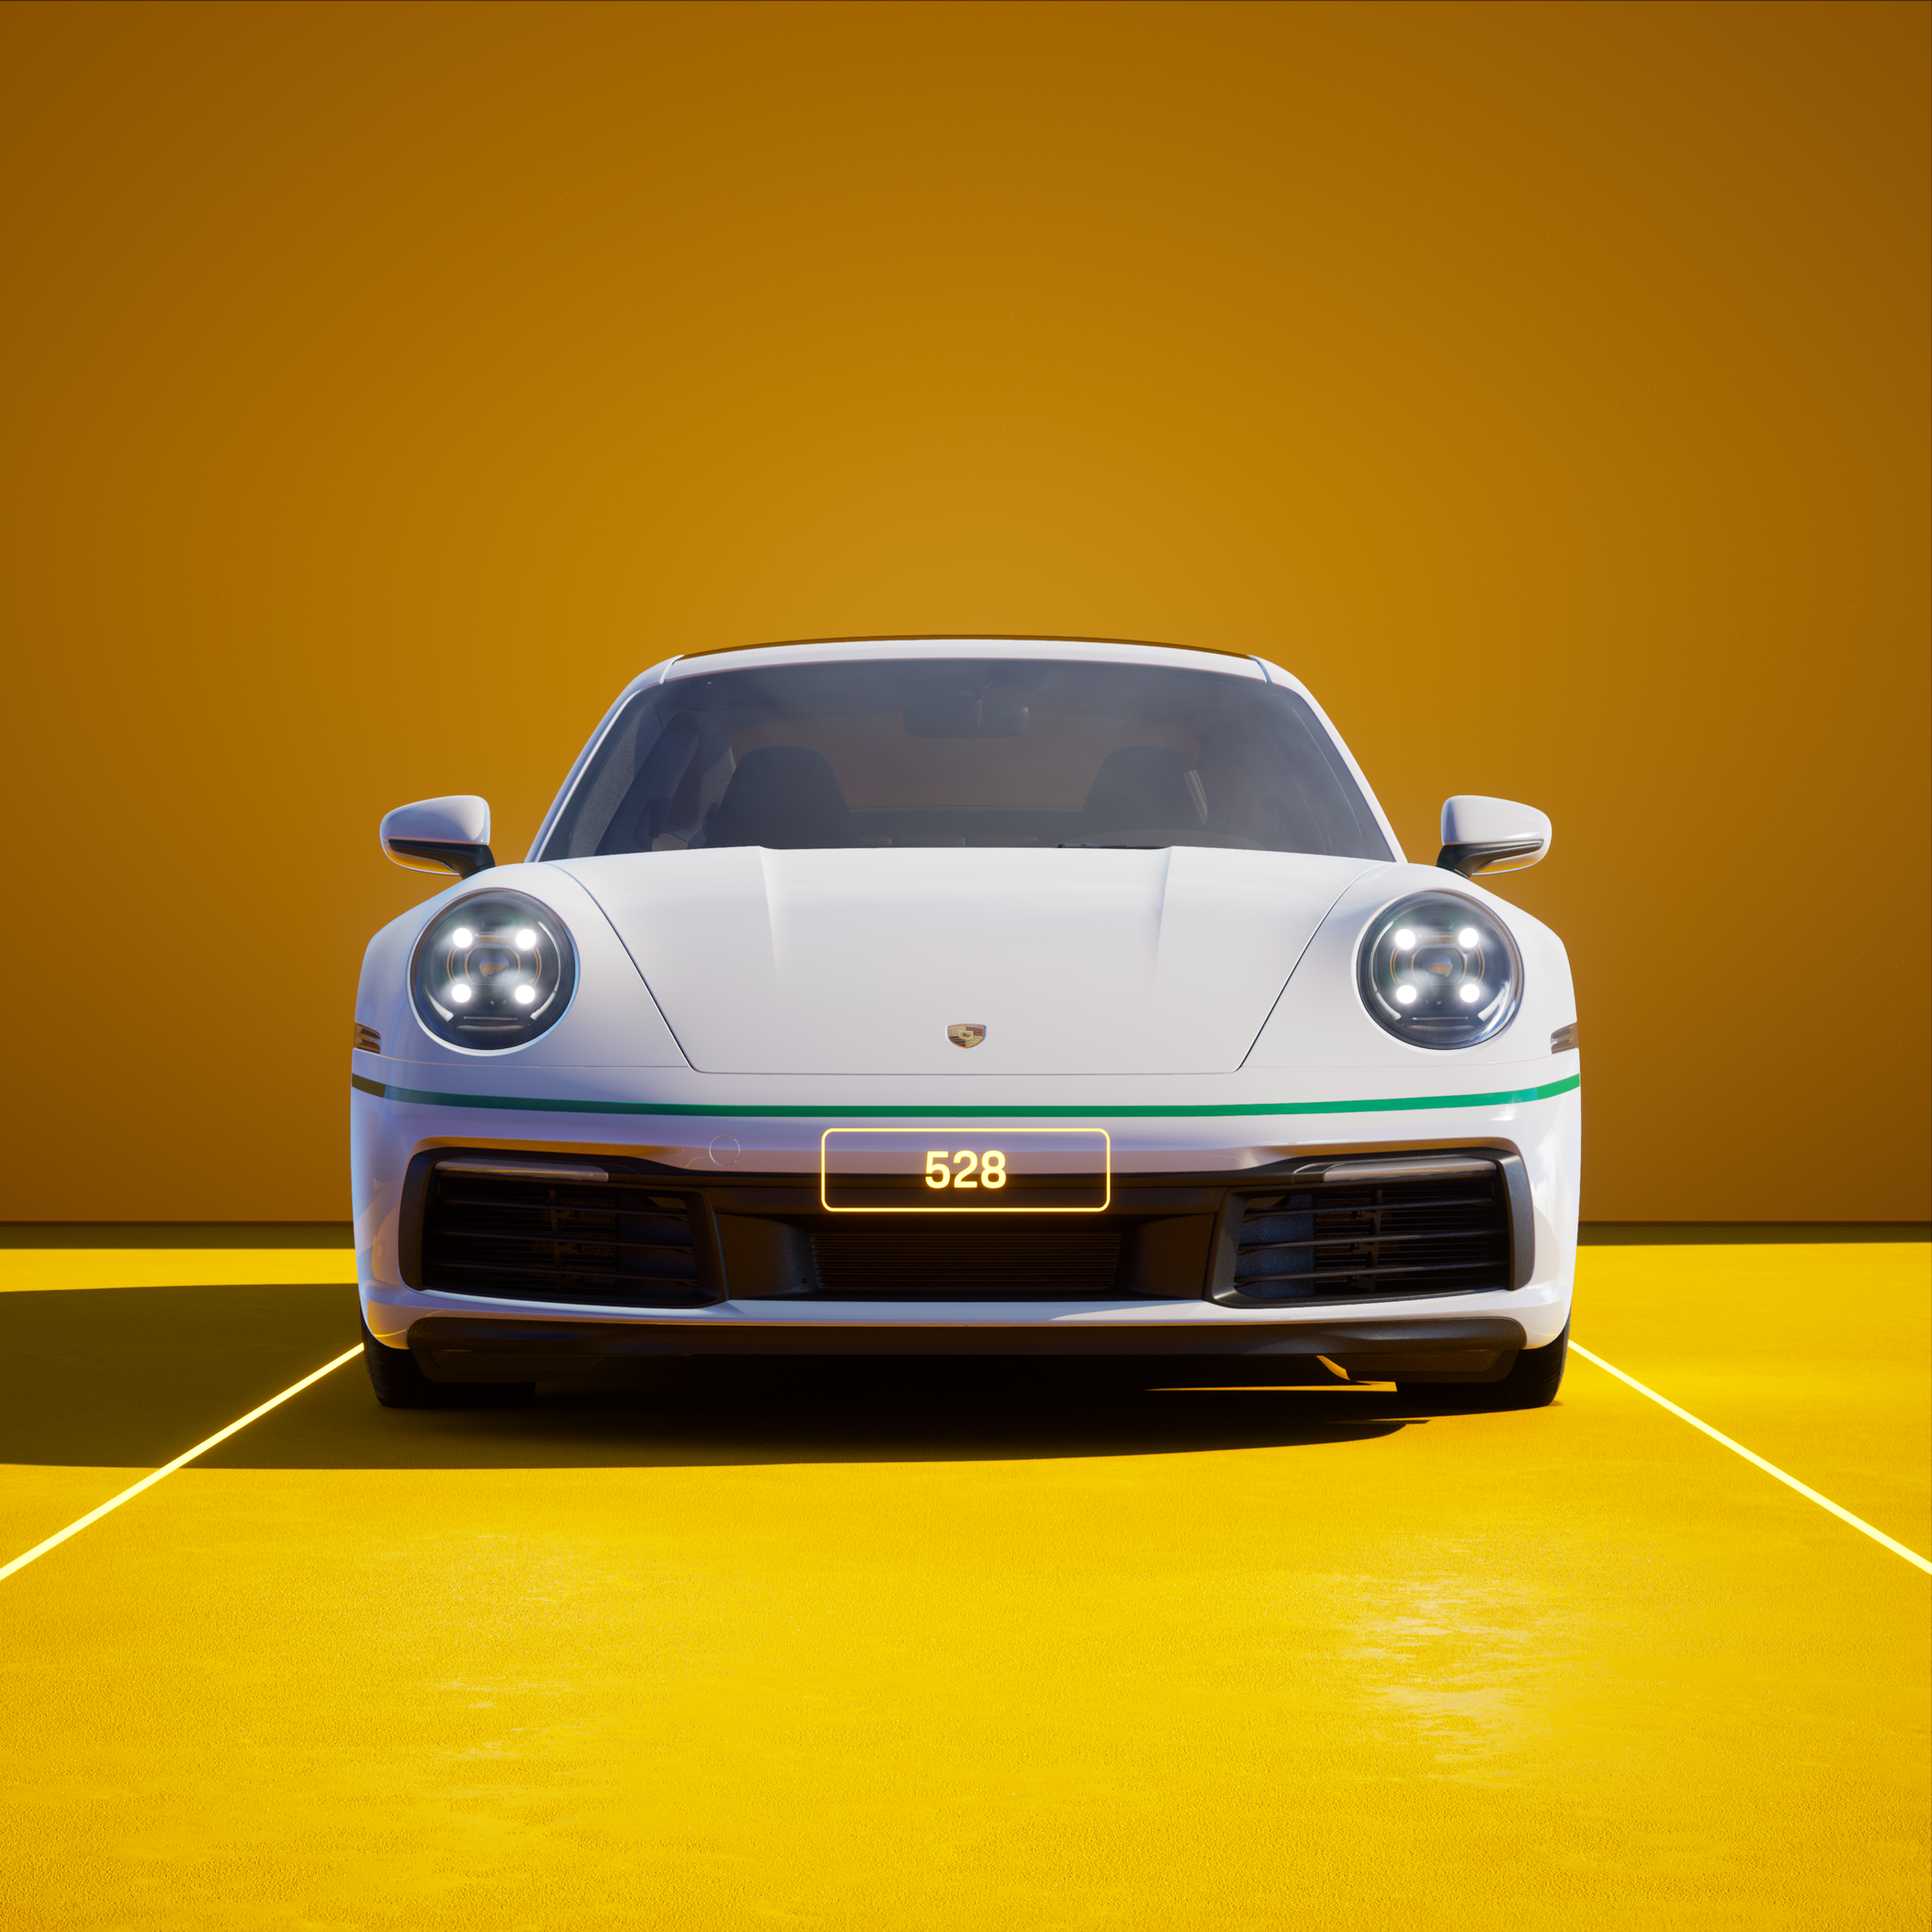 The PORSCHΞ 911 528 image in phase